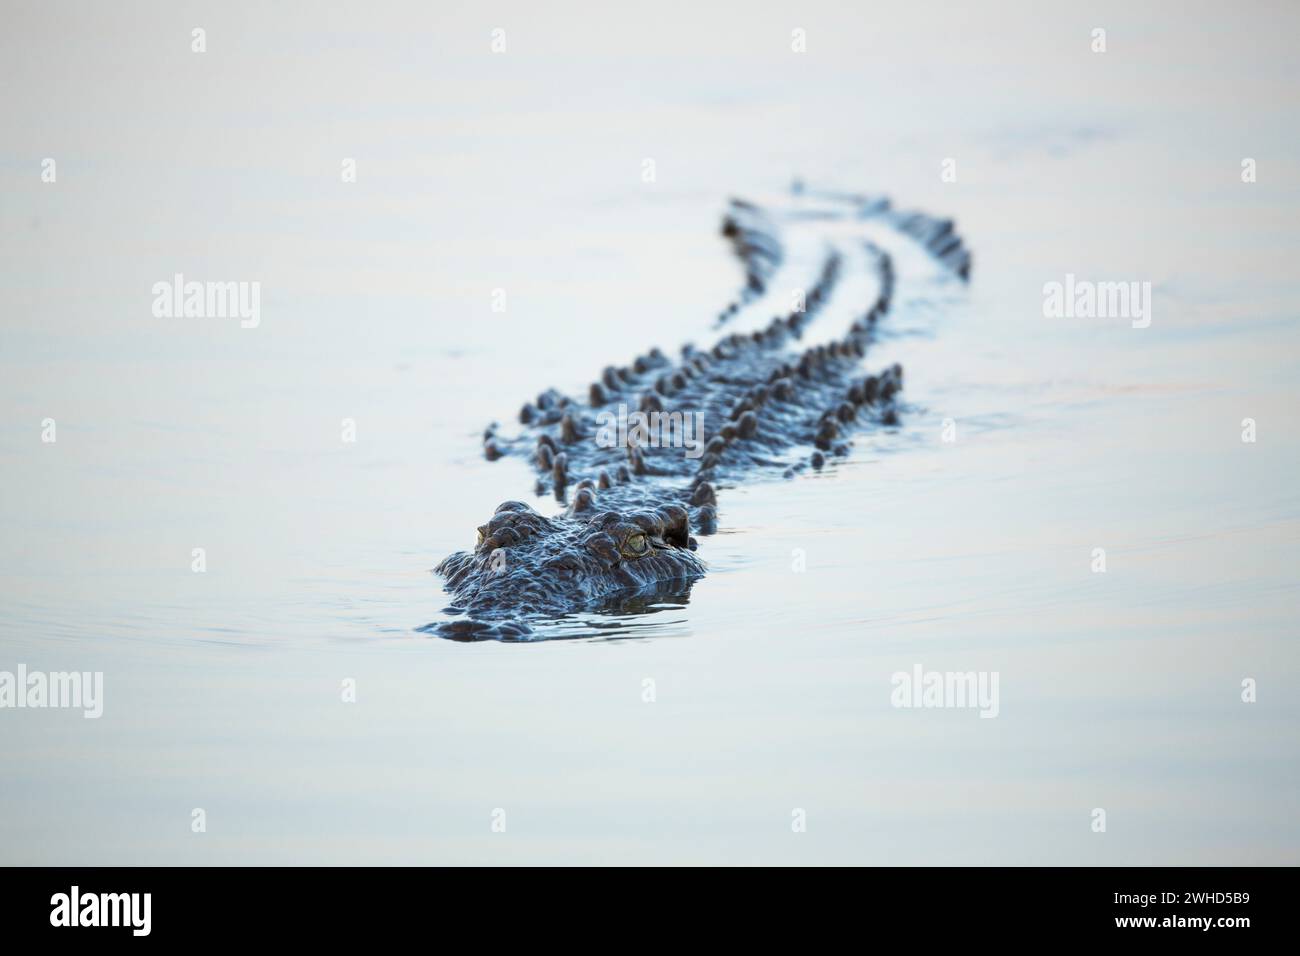 Africa, close-up, Crocodile, daytime, Kruger National Park, South Africa, nature, no people, one animal, outdoors, power in nature, swimming, water, white background, bush, National Park, tourism, safari, dangerous, danger Stock Photo